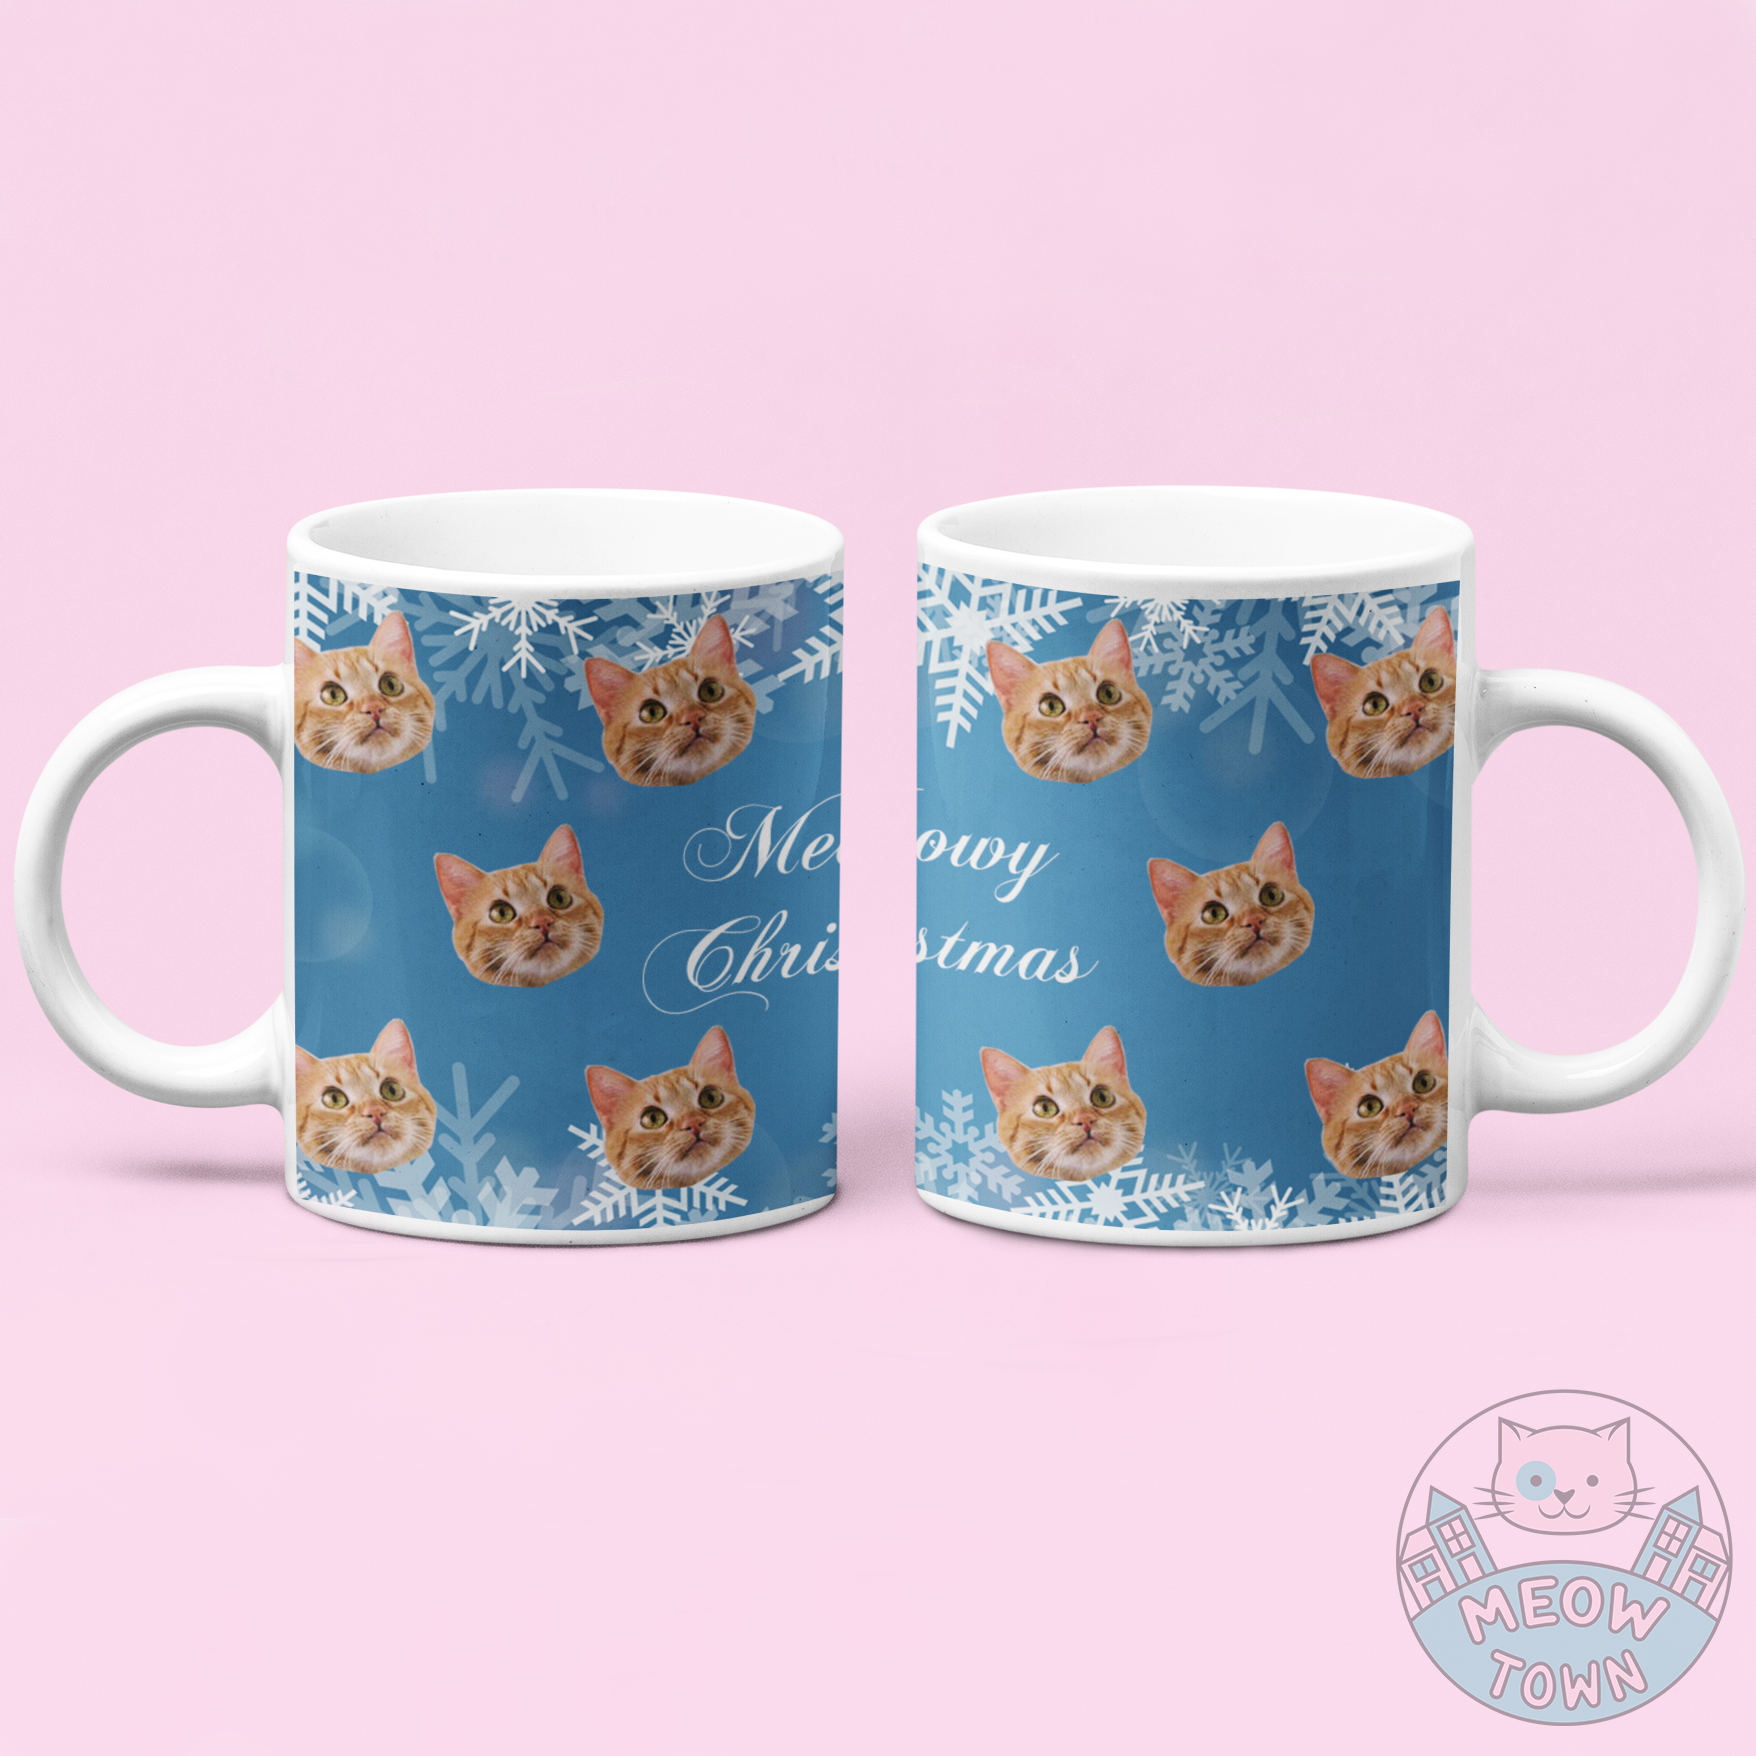 Personalise this lovely Christmas themed mug with your kitty's photo! Sip your favourite hot drink from this stylish coffee mug printed with your favourite furball(s). This design is suitable for up to 4 cats.  Meowy Christmas slogan at the center. Unique custom present for the cat lover in your life!